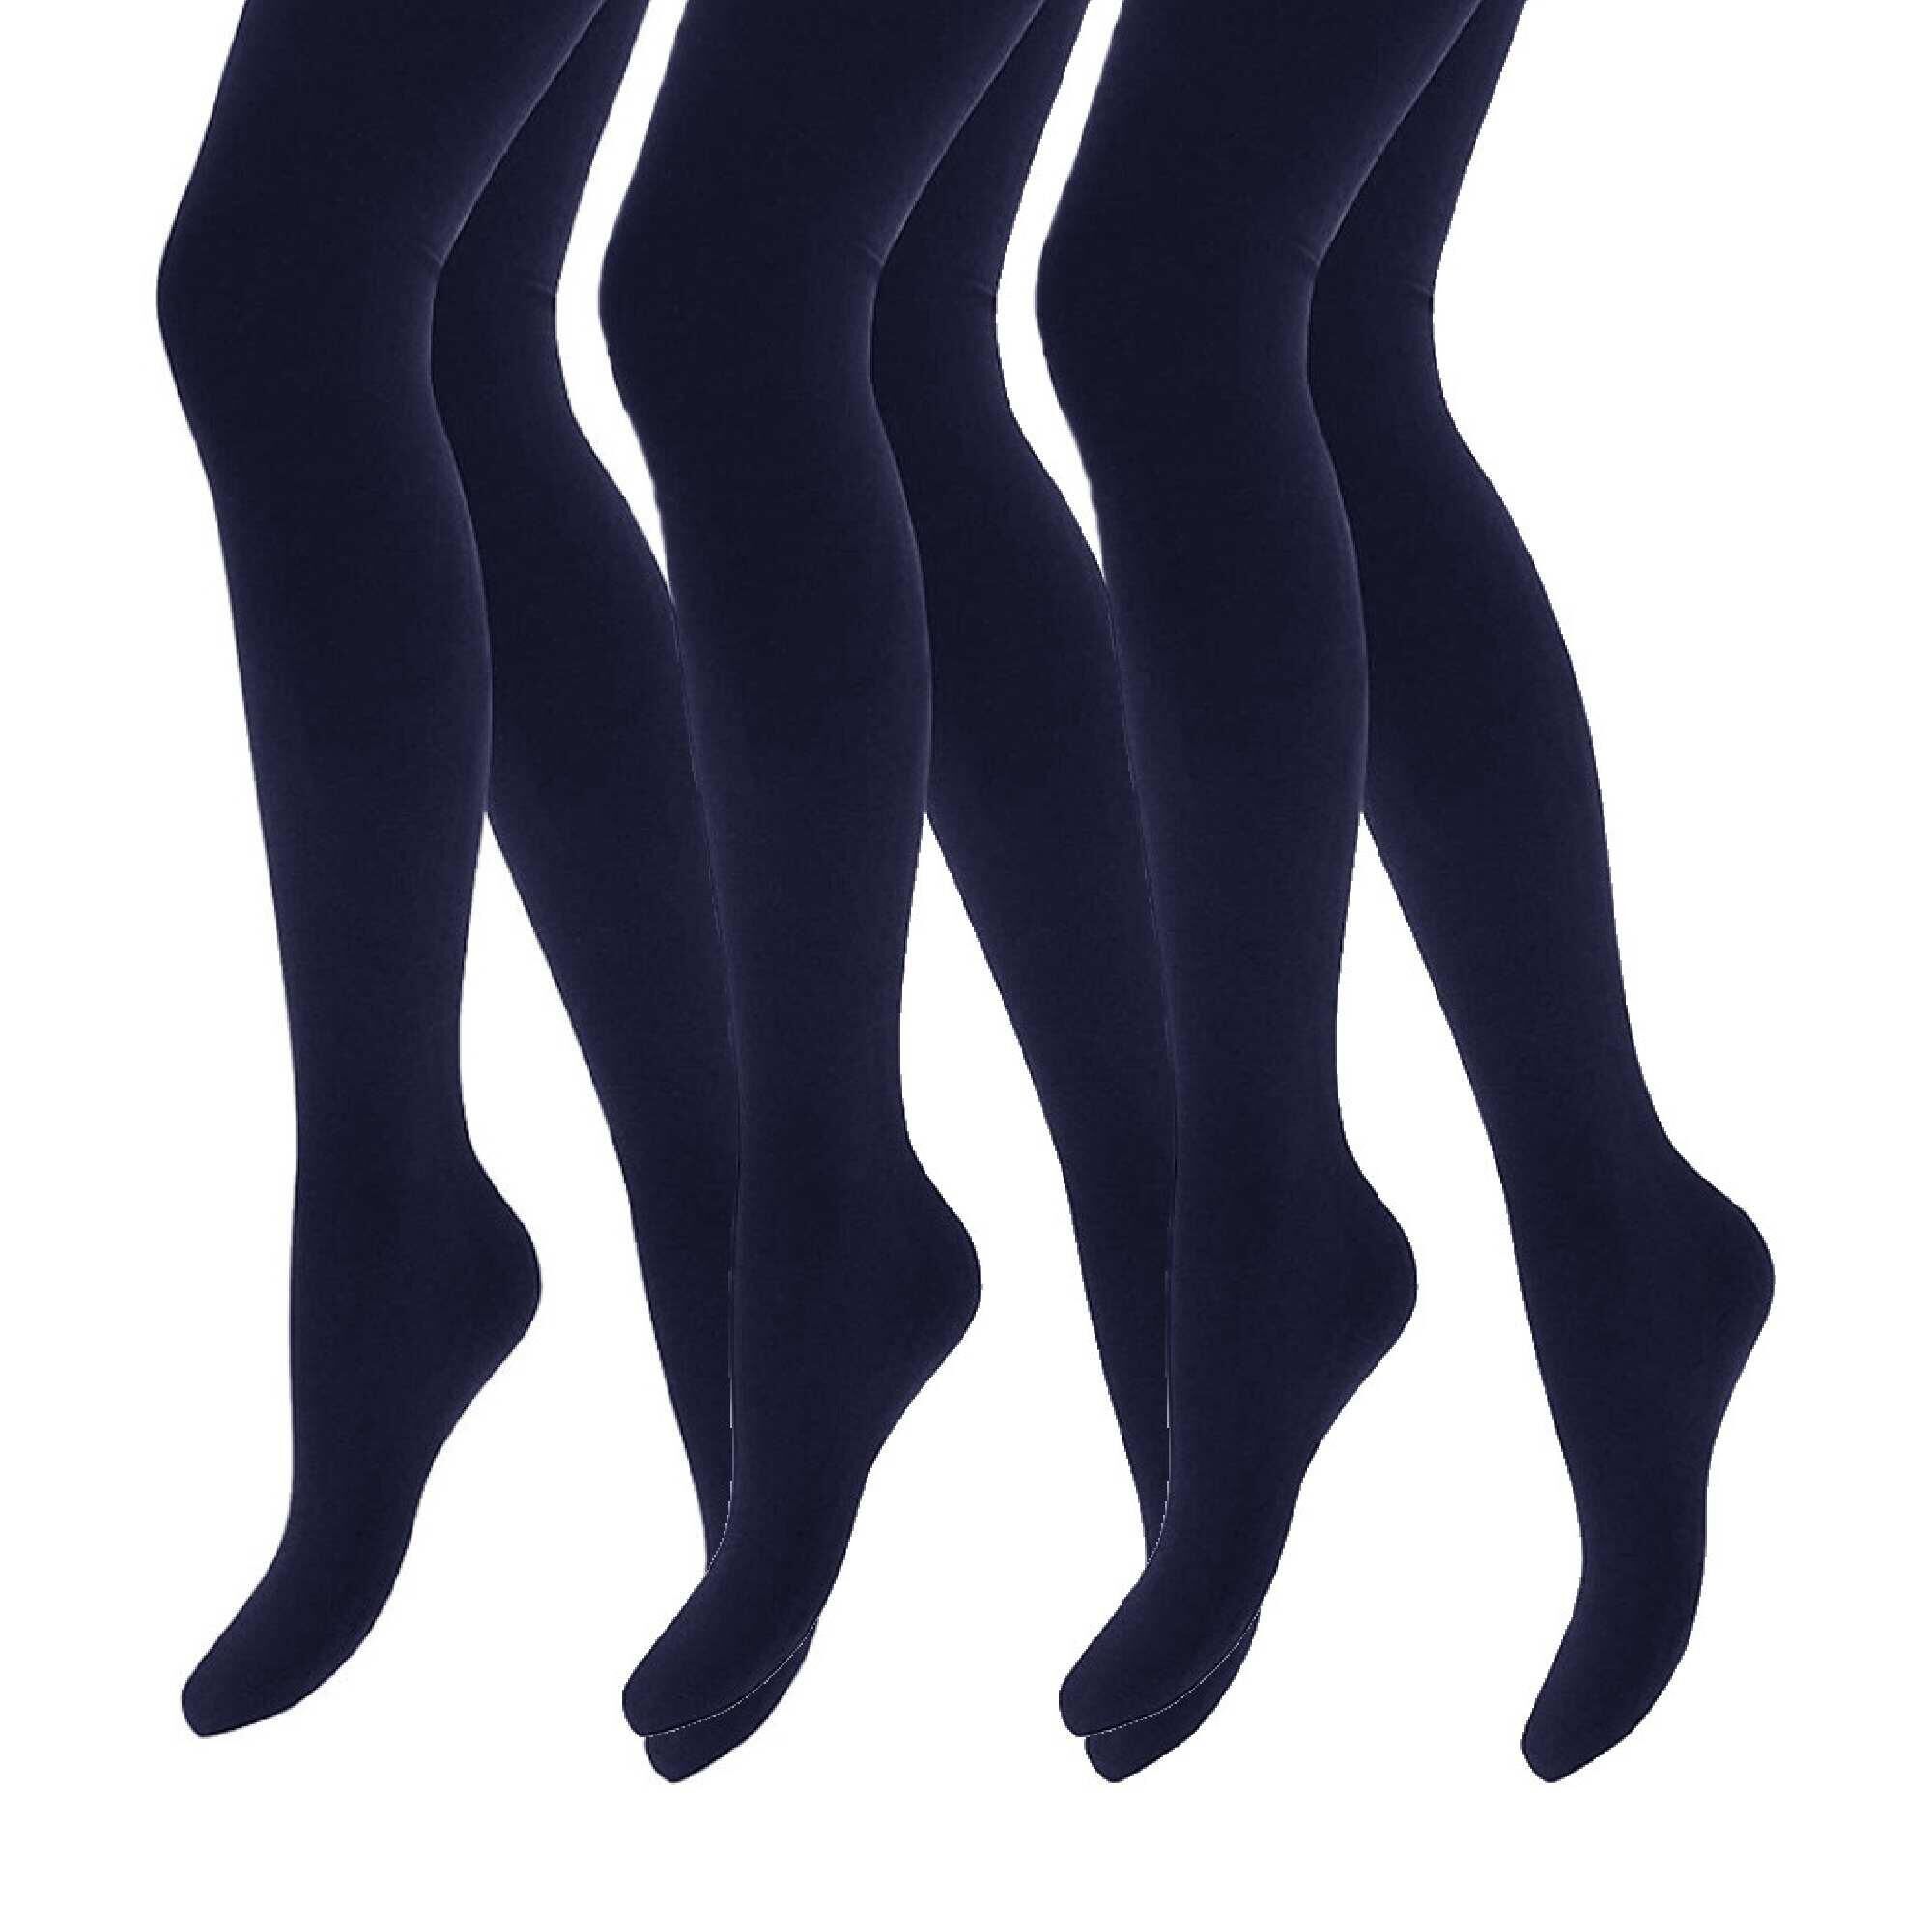 3 Pair Multipack Ladies Thermal Tights, THMO, Black Winter Fleece Lined  Tights for Women - Black